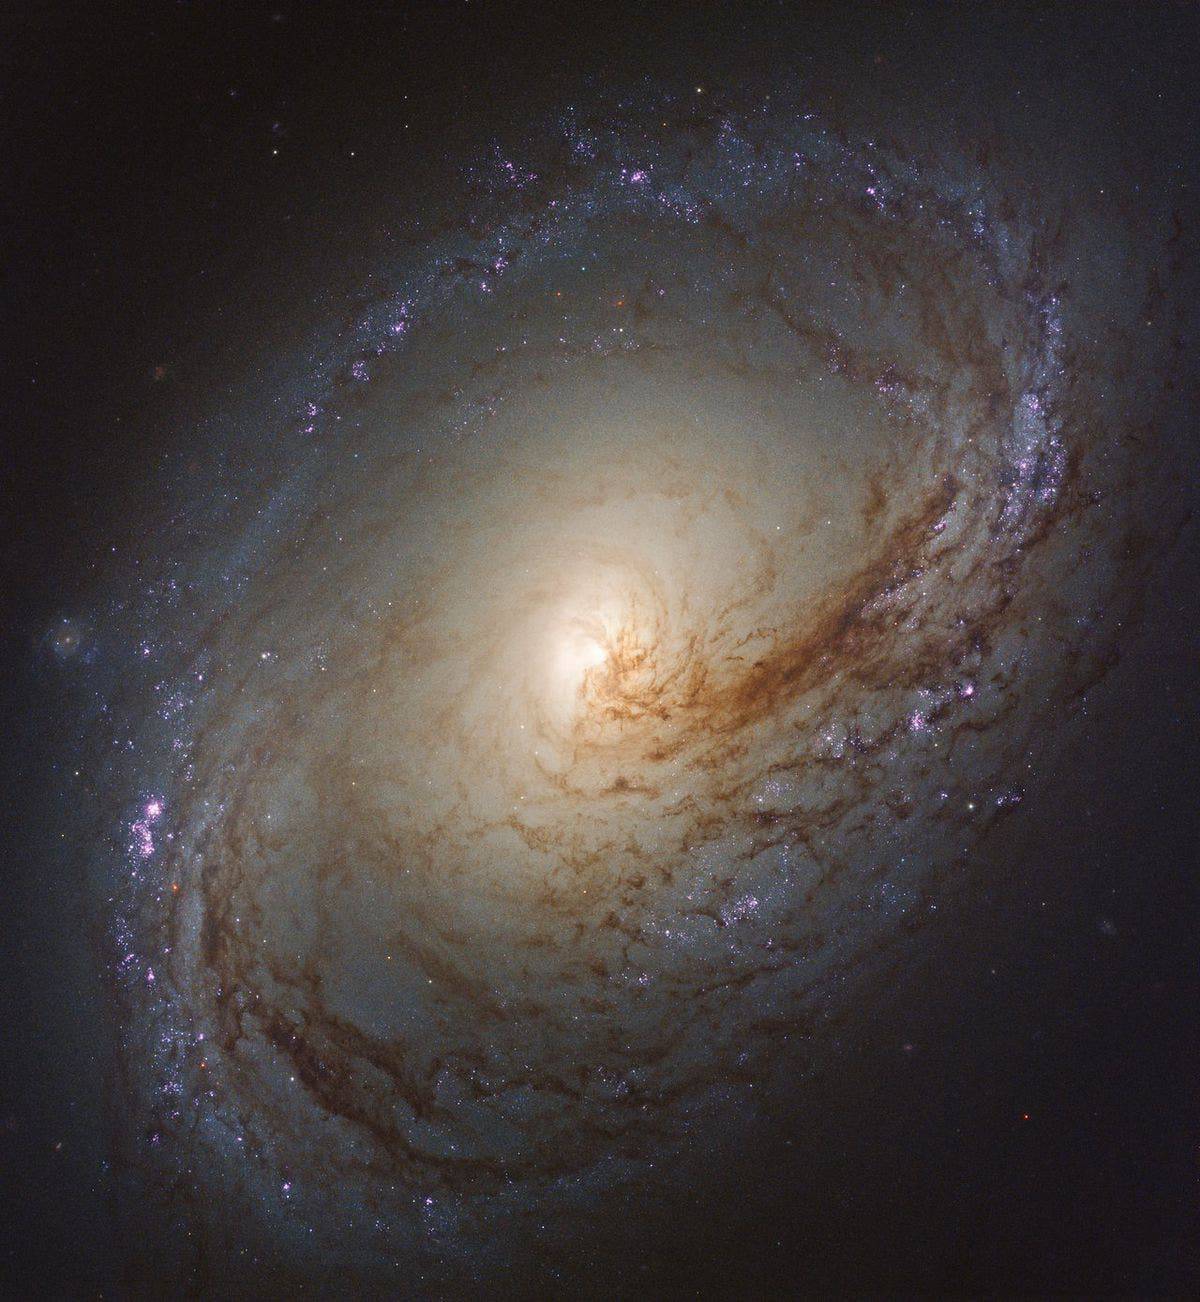 The spiral galaxy Messier 96 lies some 35 million light years away. Image credits: NASA, ESA, and the LEGUS TEAM.